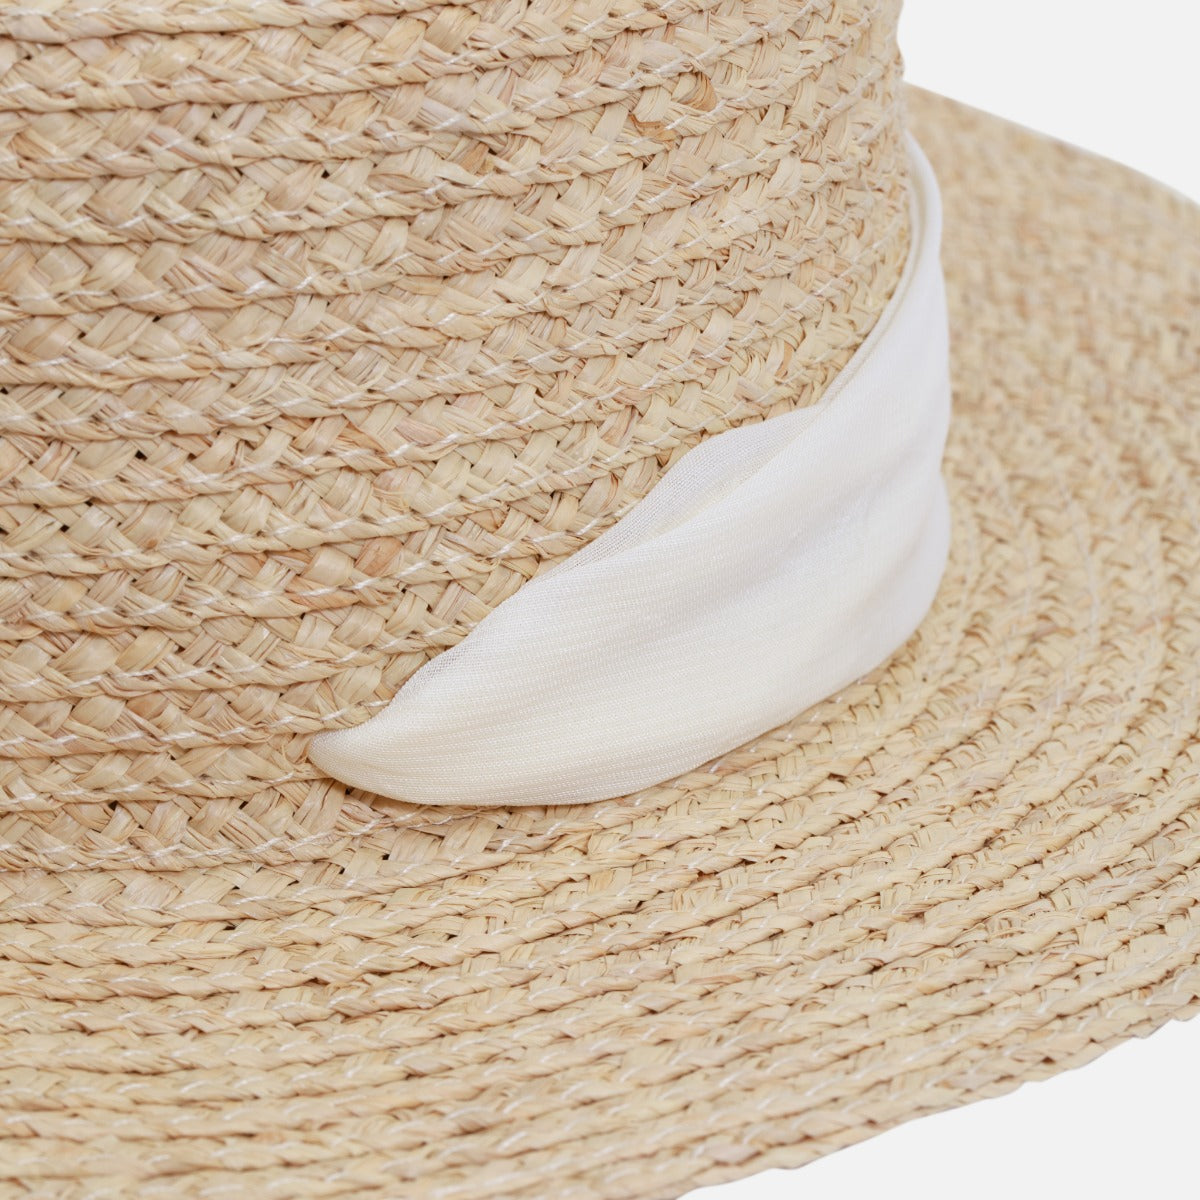 Beige boater straw hat with pale ribbon